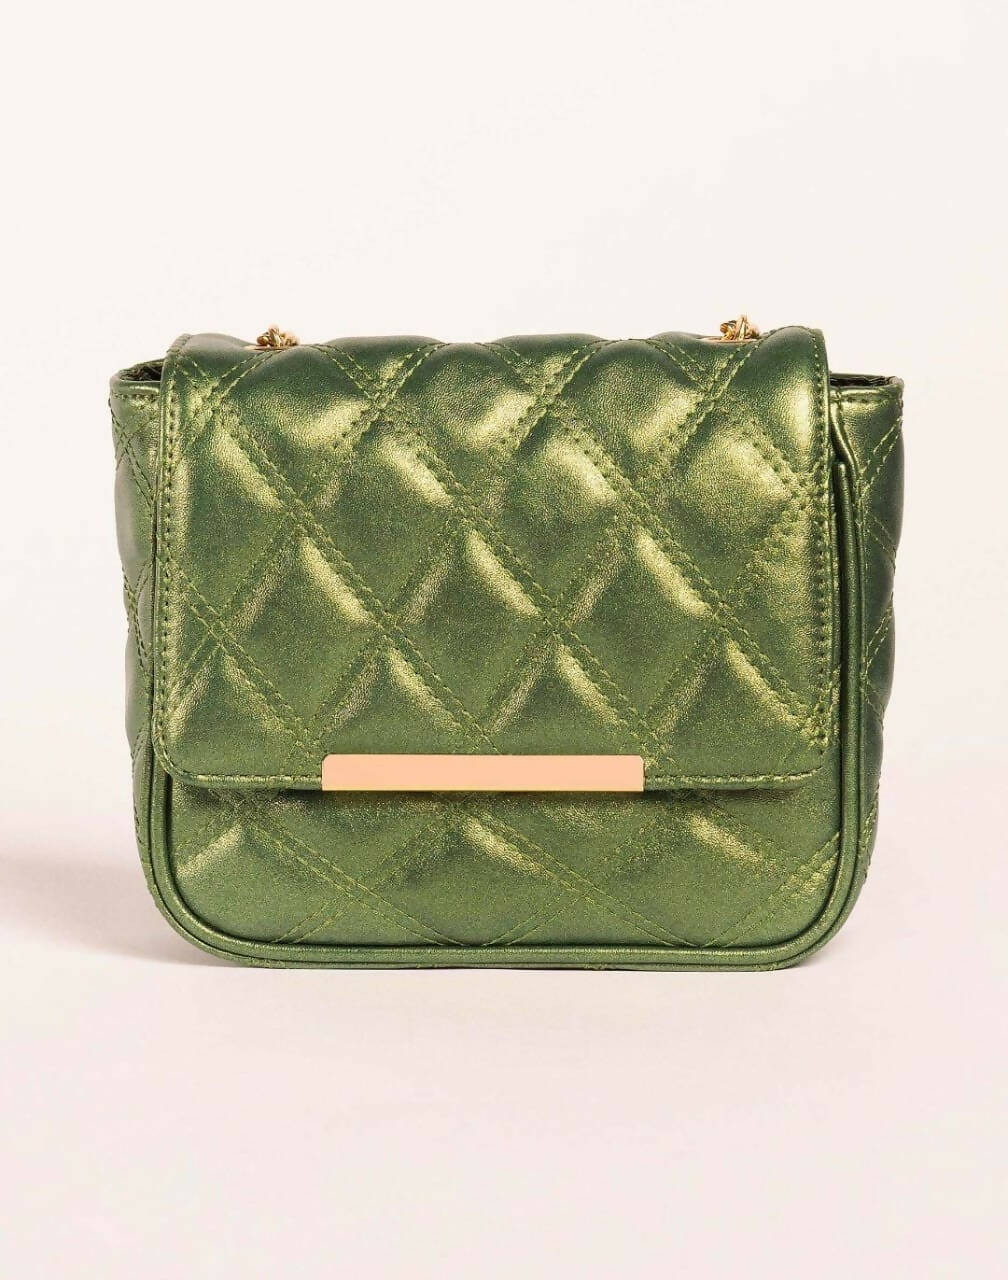 Limelight | Cross body Bag | Women Bags | Medium | Brand New with Tags